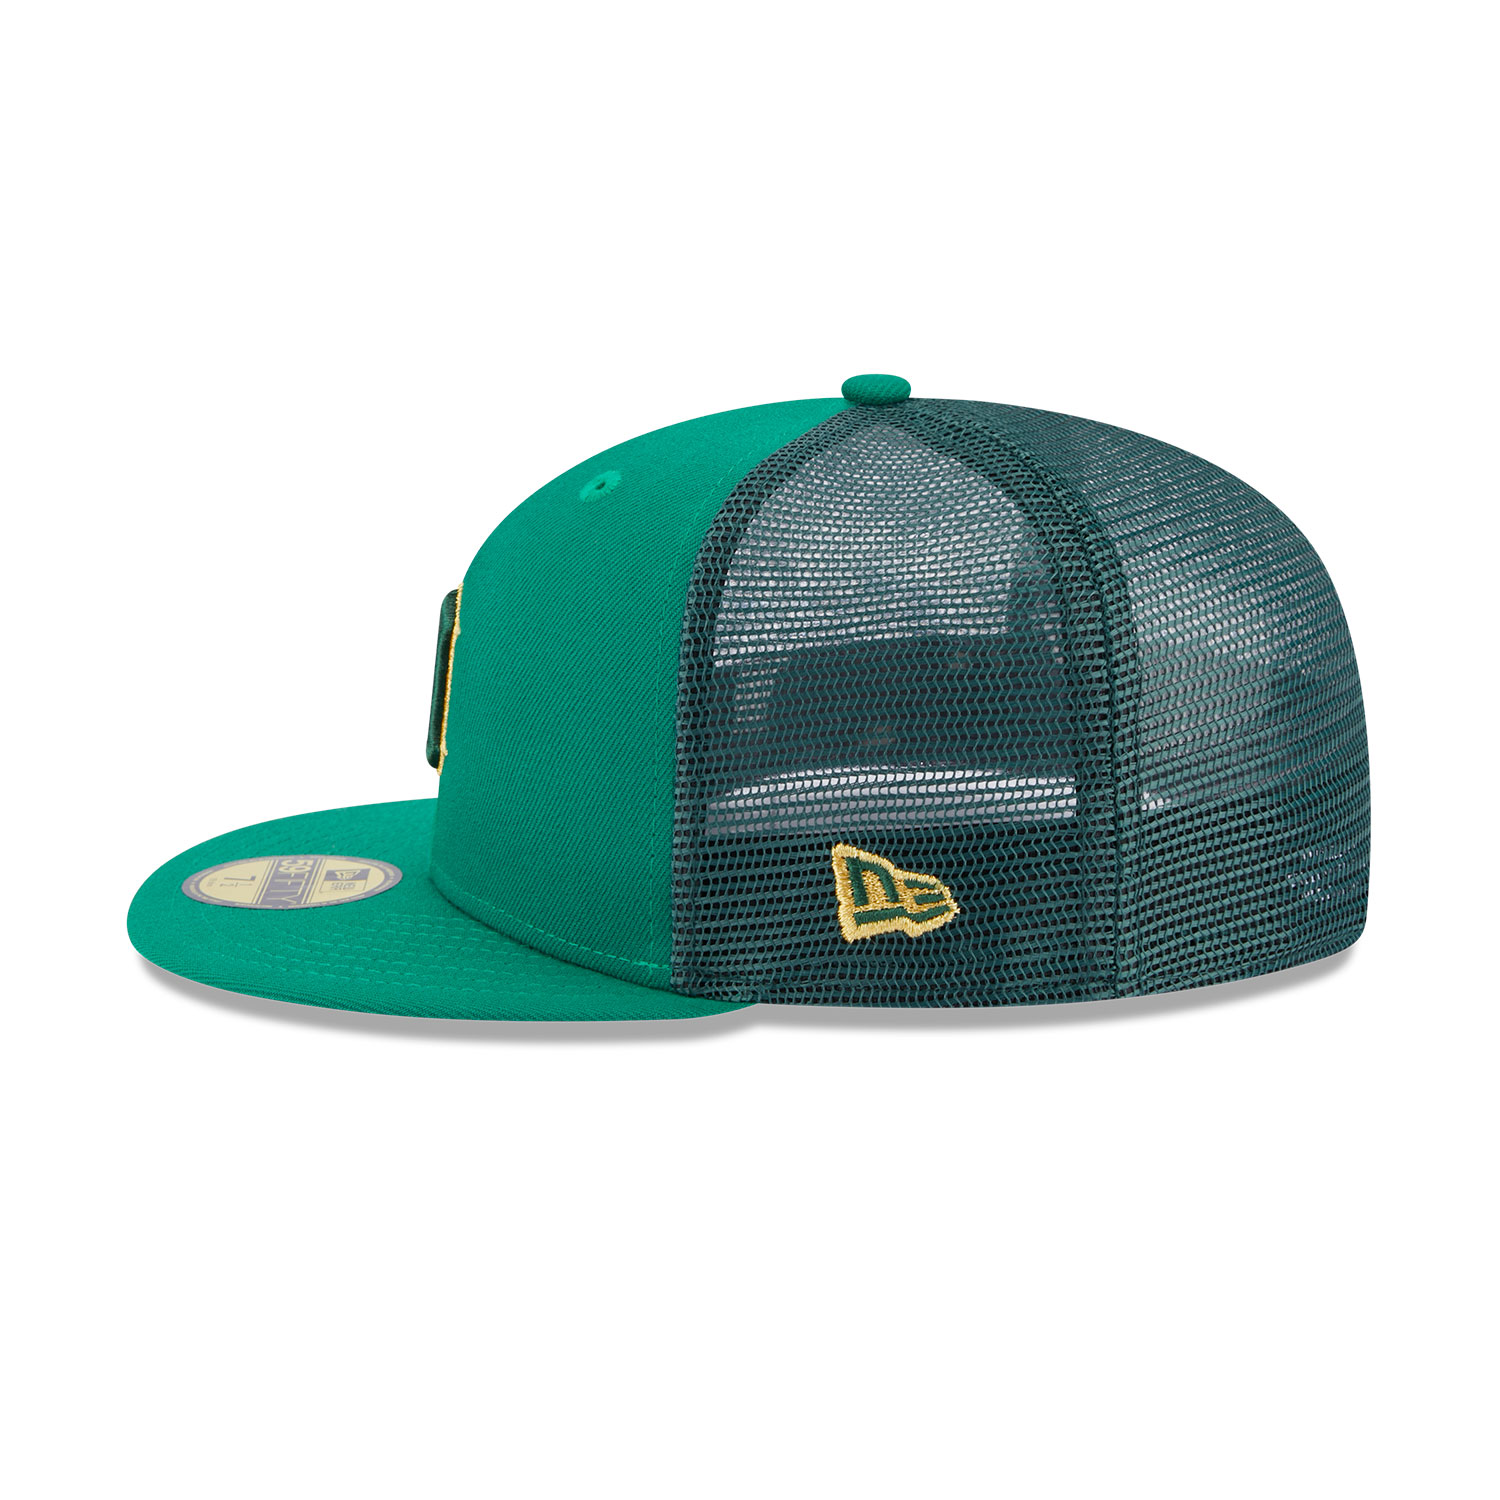 Official New Era MLB St Patricks Day Detroit Tigers 59FIFTY Fitted Cap